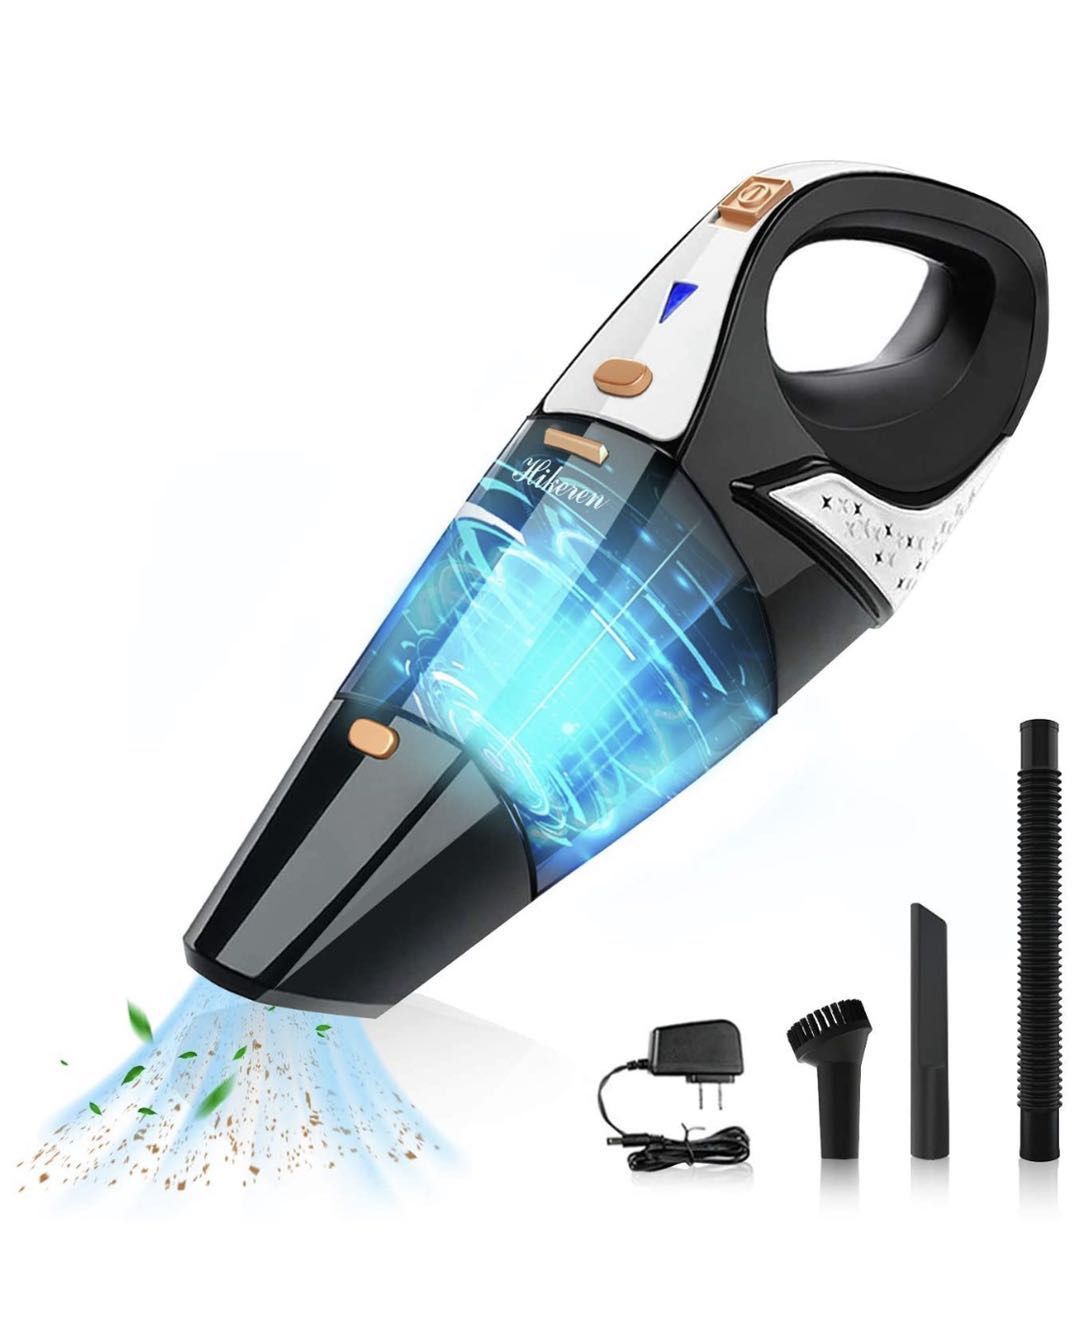 Handheld Vacuum,7Kpa Strong Suction Hand Vacuum Cordless,Wet & Dry Handheld Vacuum Cleaner with Stainless Steel HEPA Filter for Home and Car Cleaning